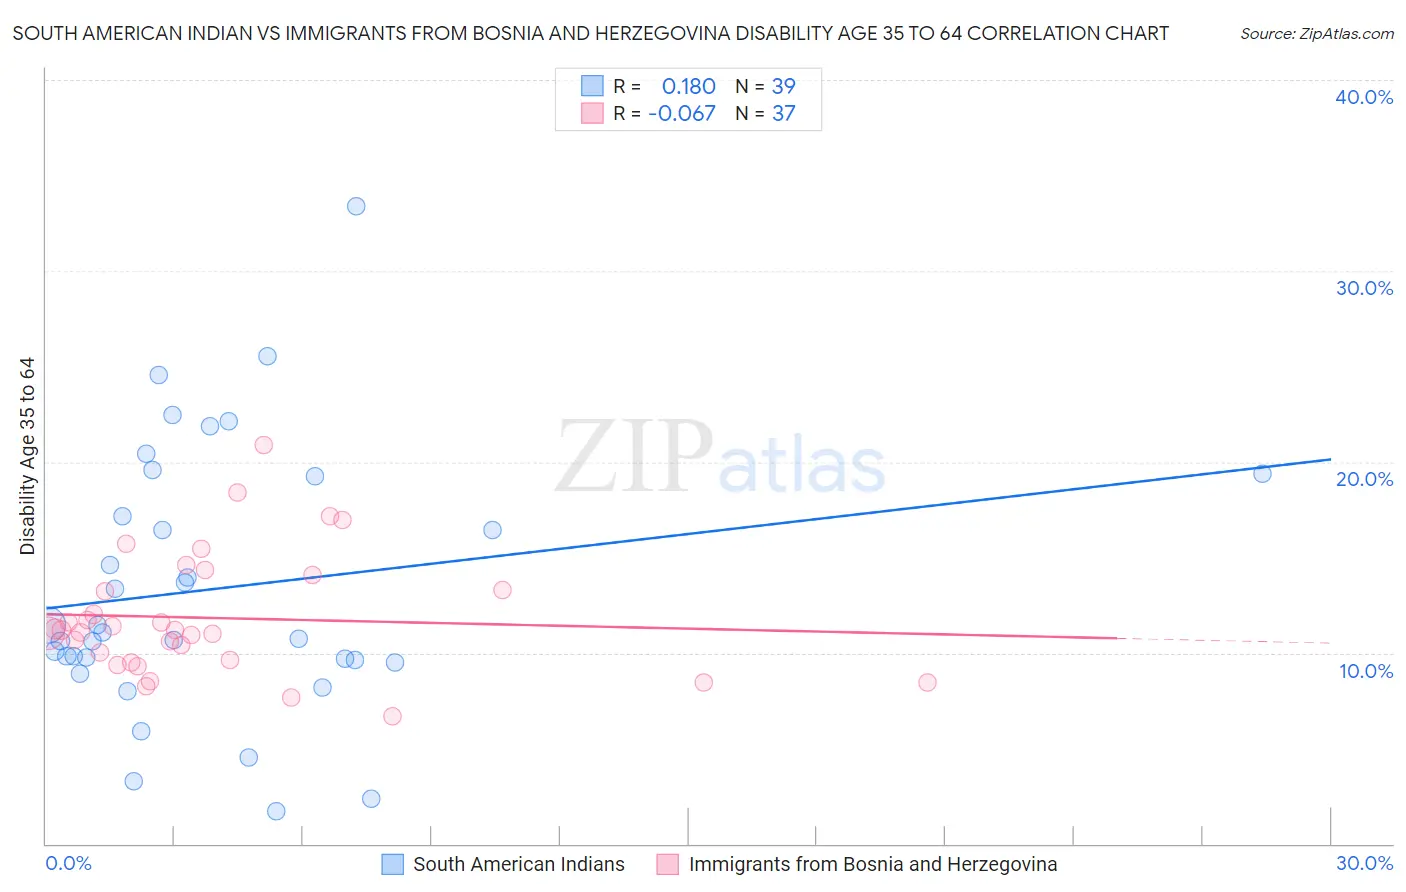 South American Indian vs Immigrants from Bosnia and Herzegovina Disability Age 35 to 64